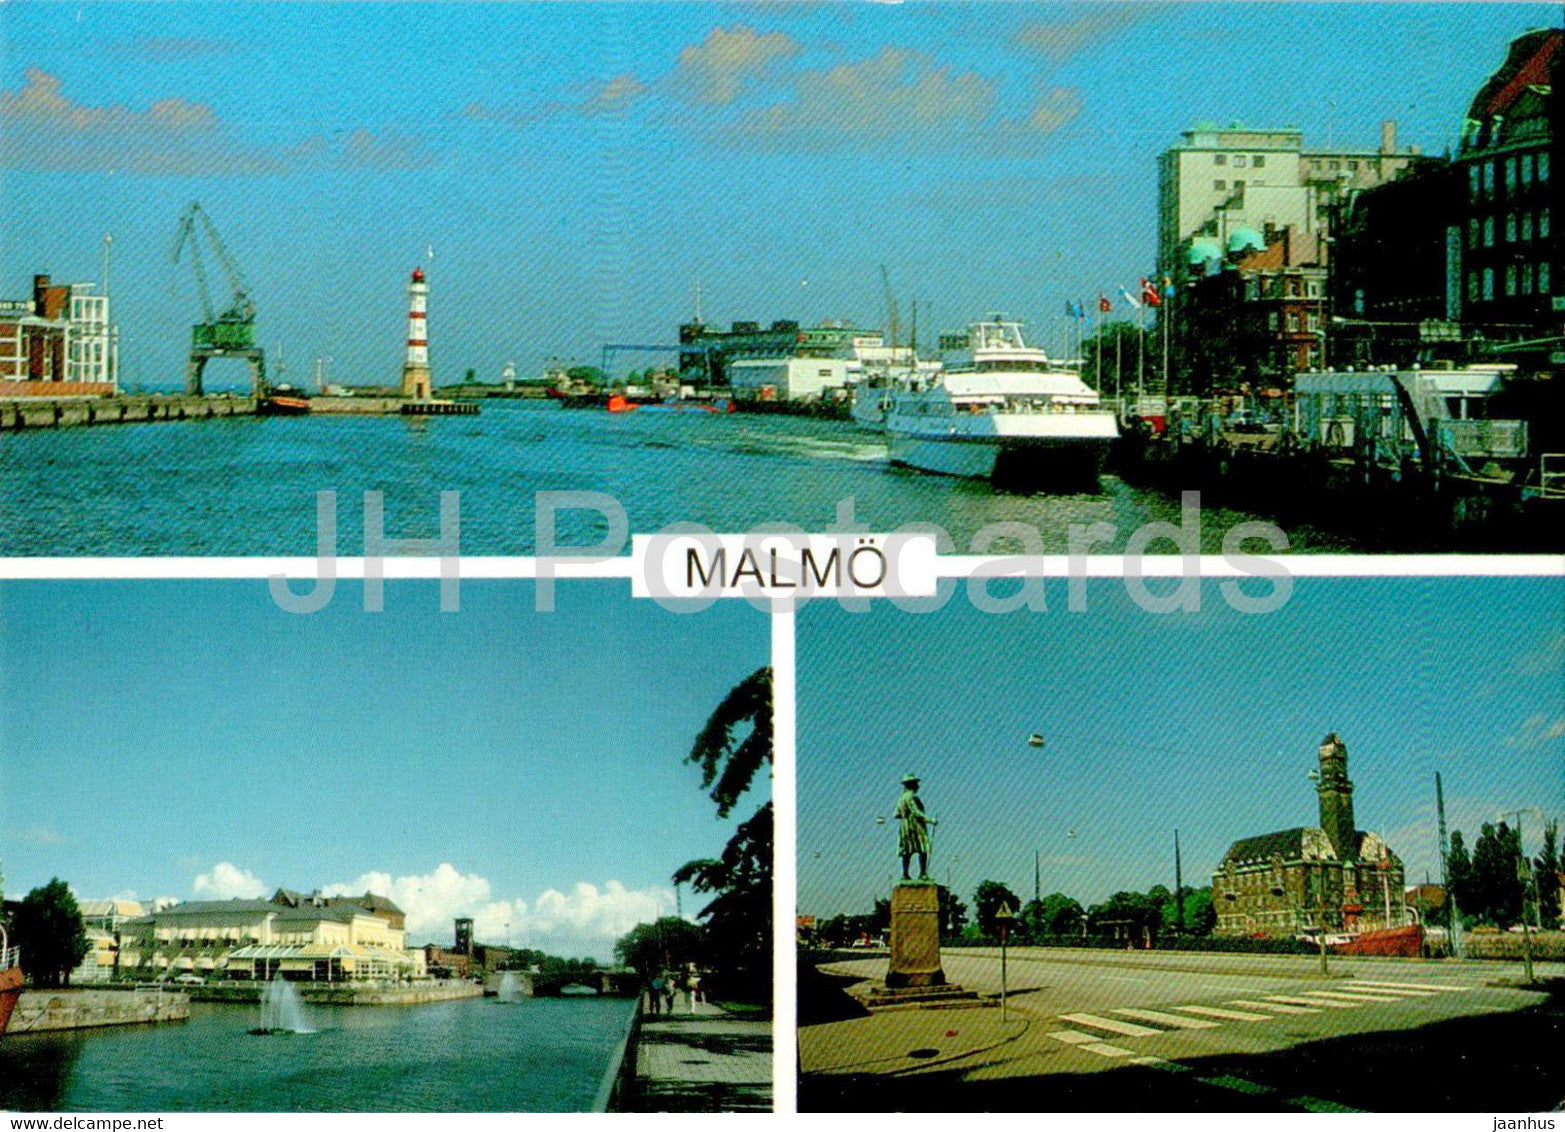 Malmo - ship - multiview - 956 - Sweden - unused - JH Postcards